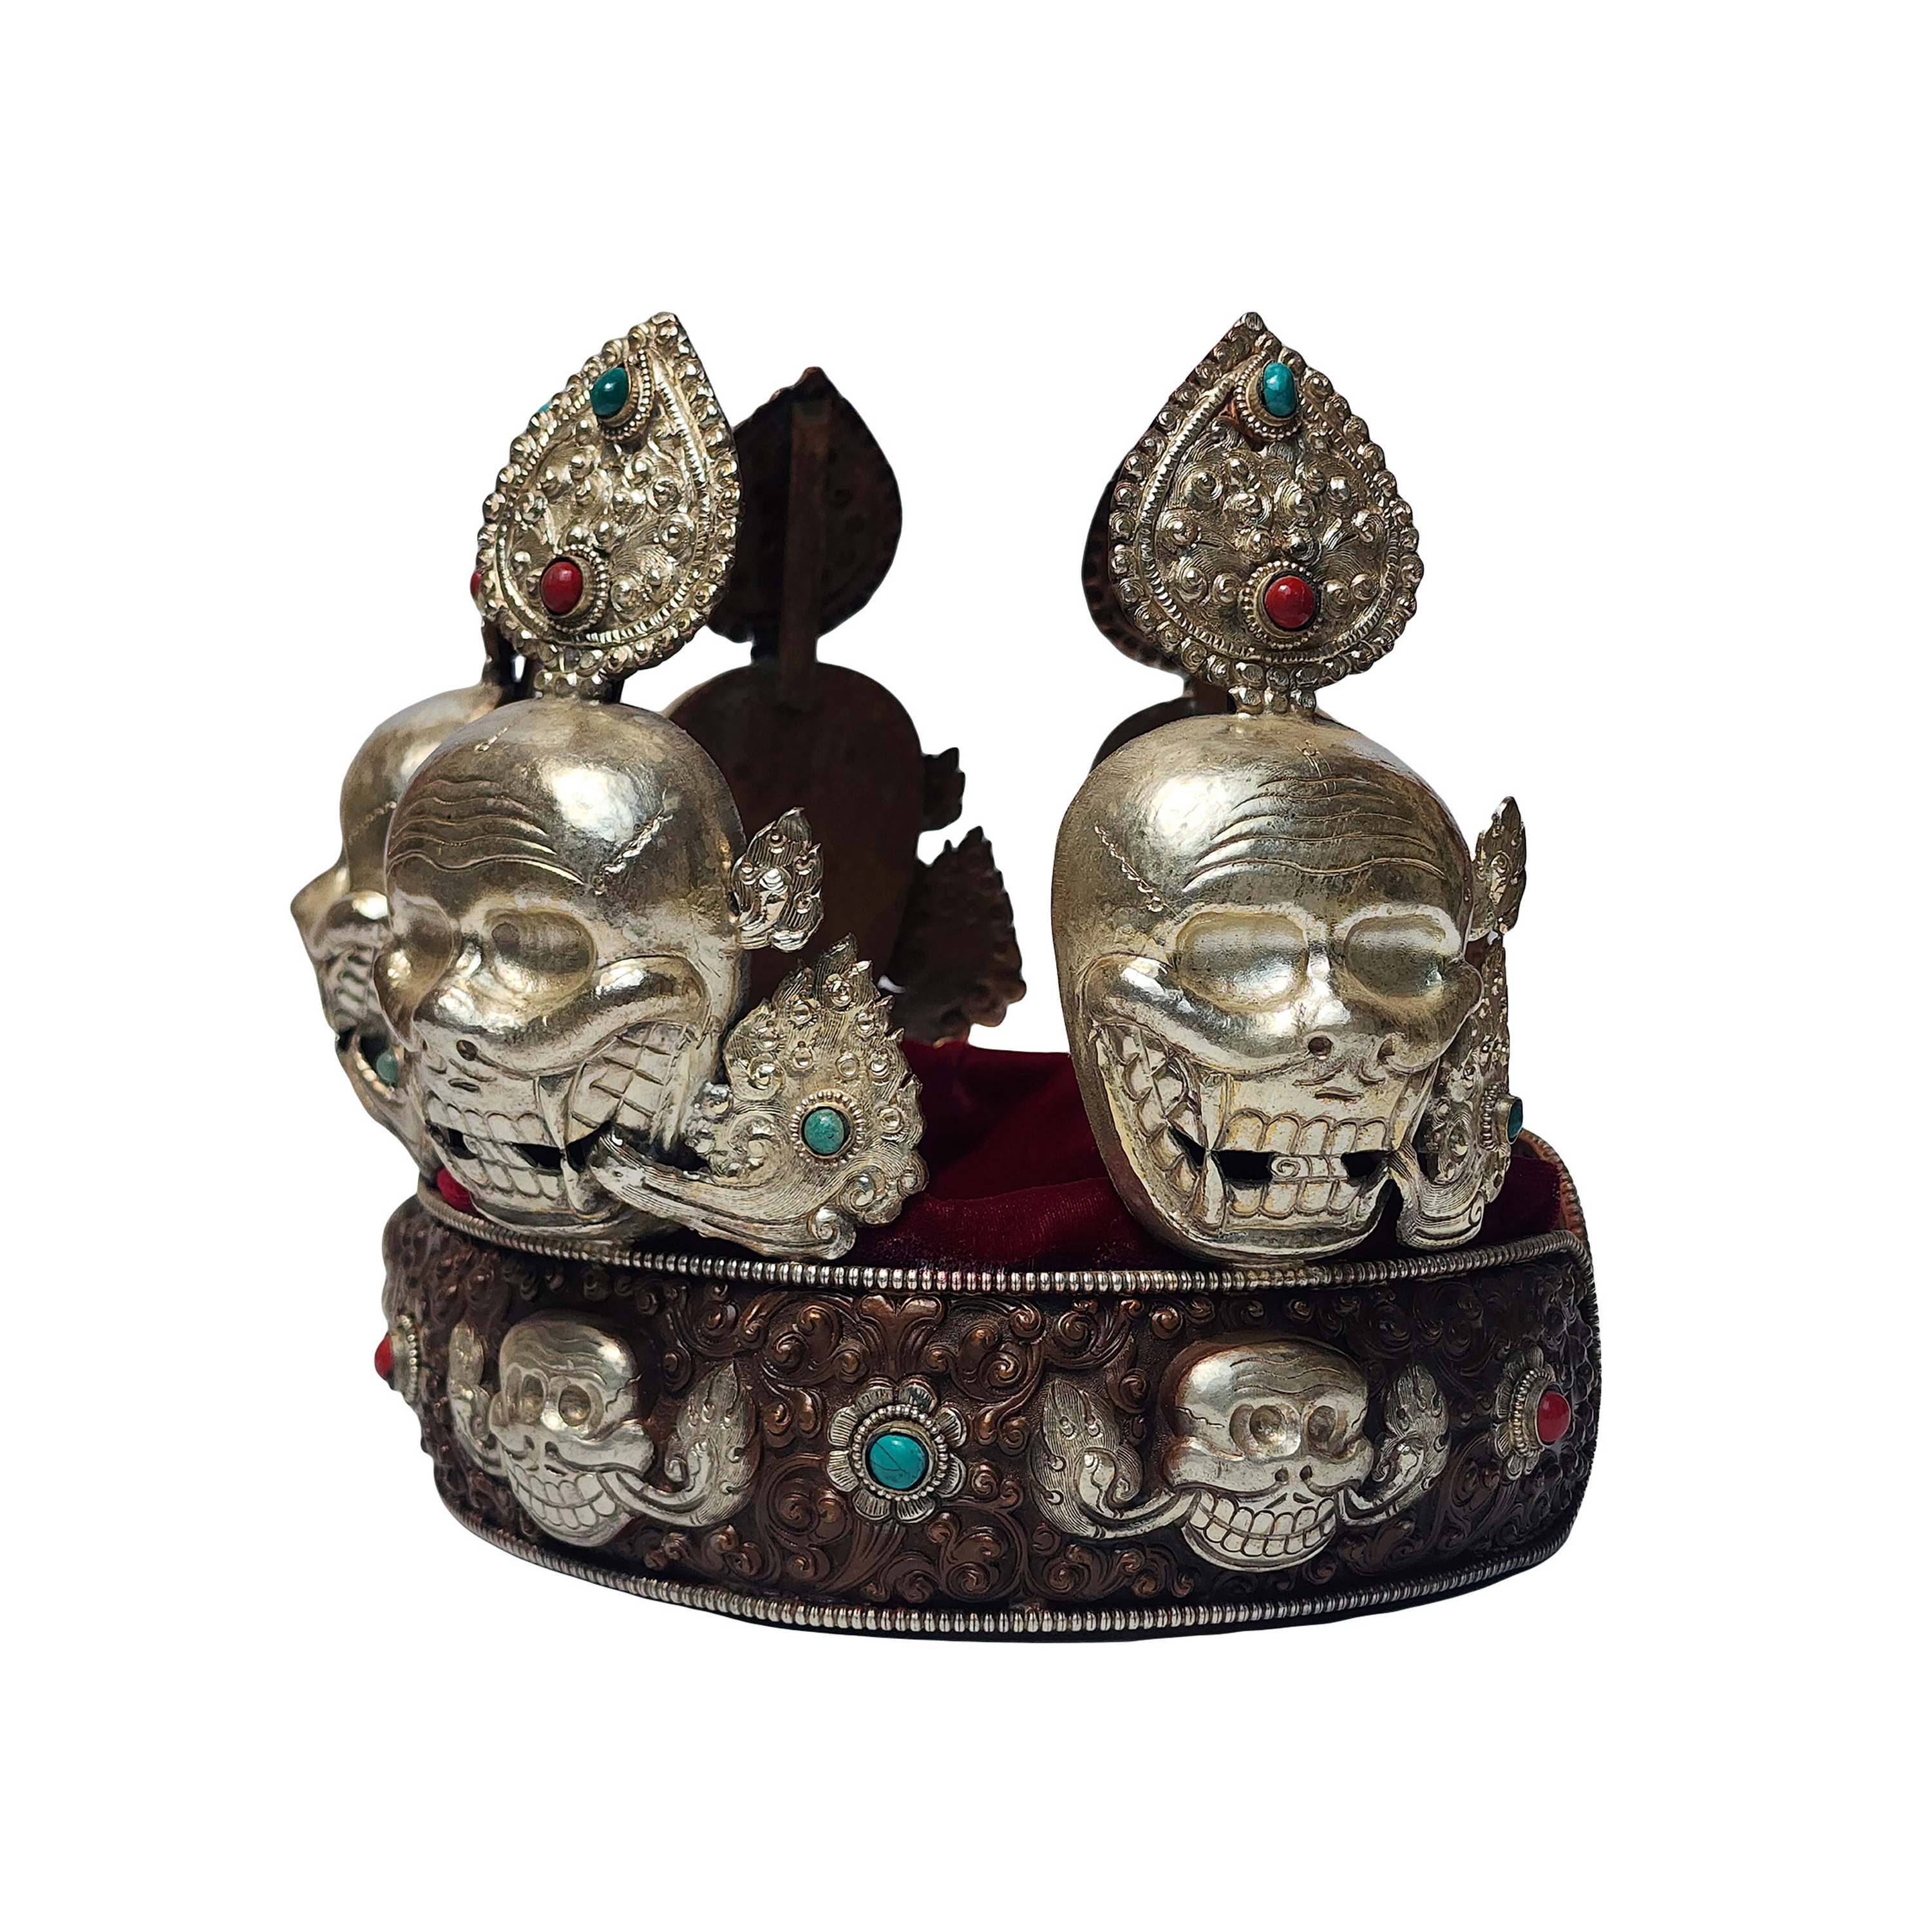 crown With Gem-encrusted, Handmade Buddhist Crown With Skull Design, Full Copper And Silver Plated